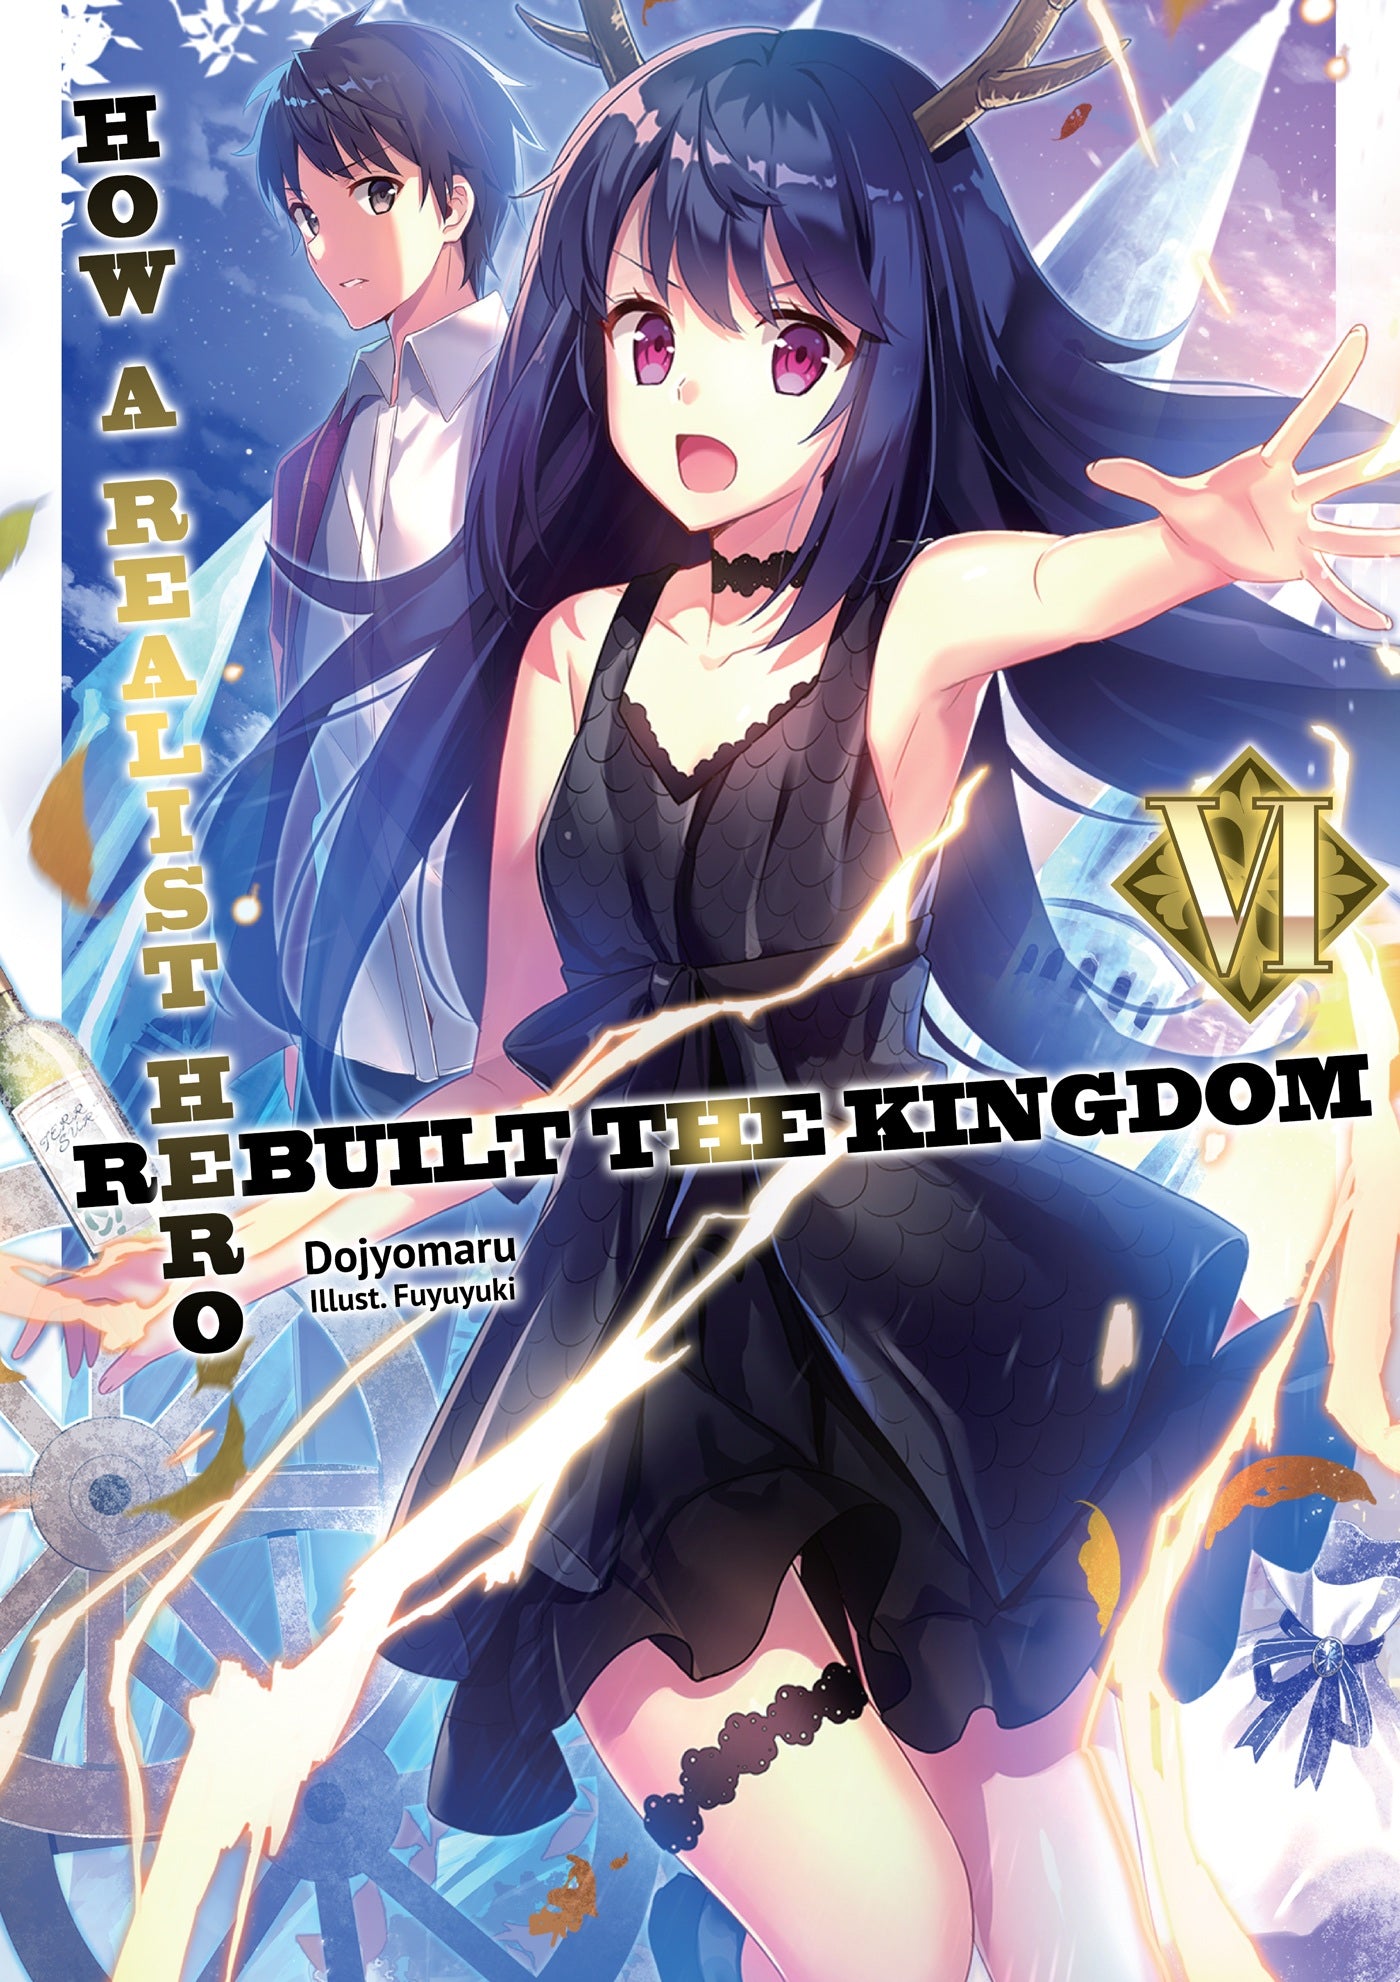 How a Realist Hero Rebuilt the Kingdom (Light Novel) Vol. 06 (Out of Stock Indefinitely)